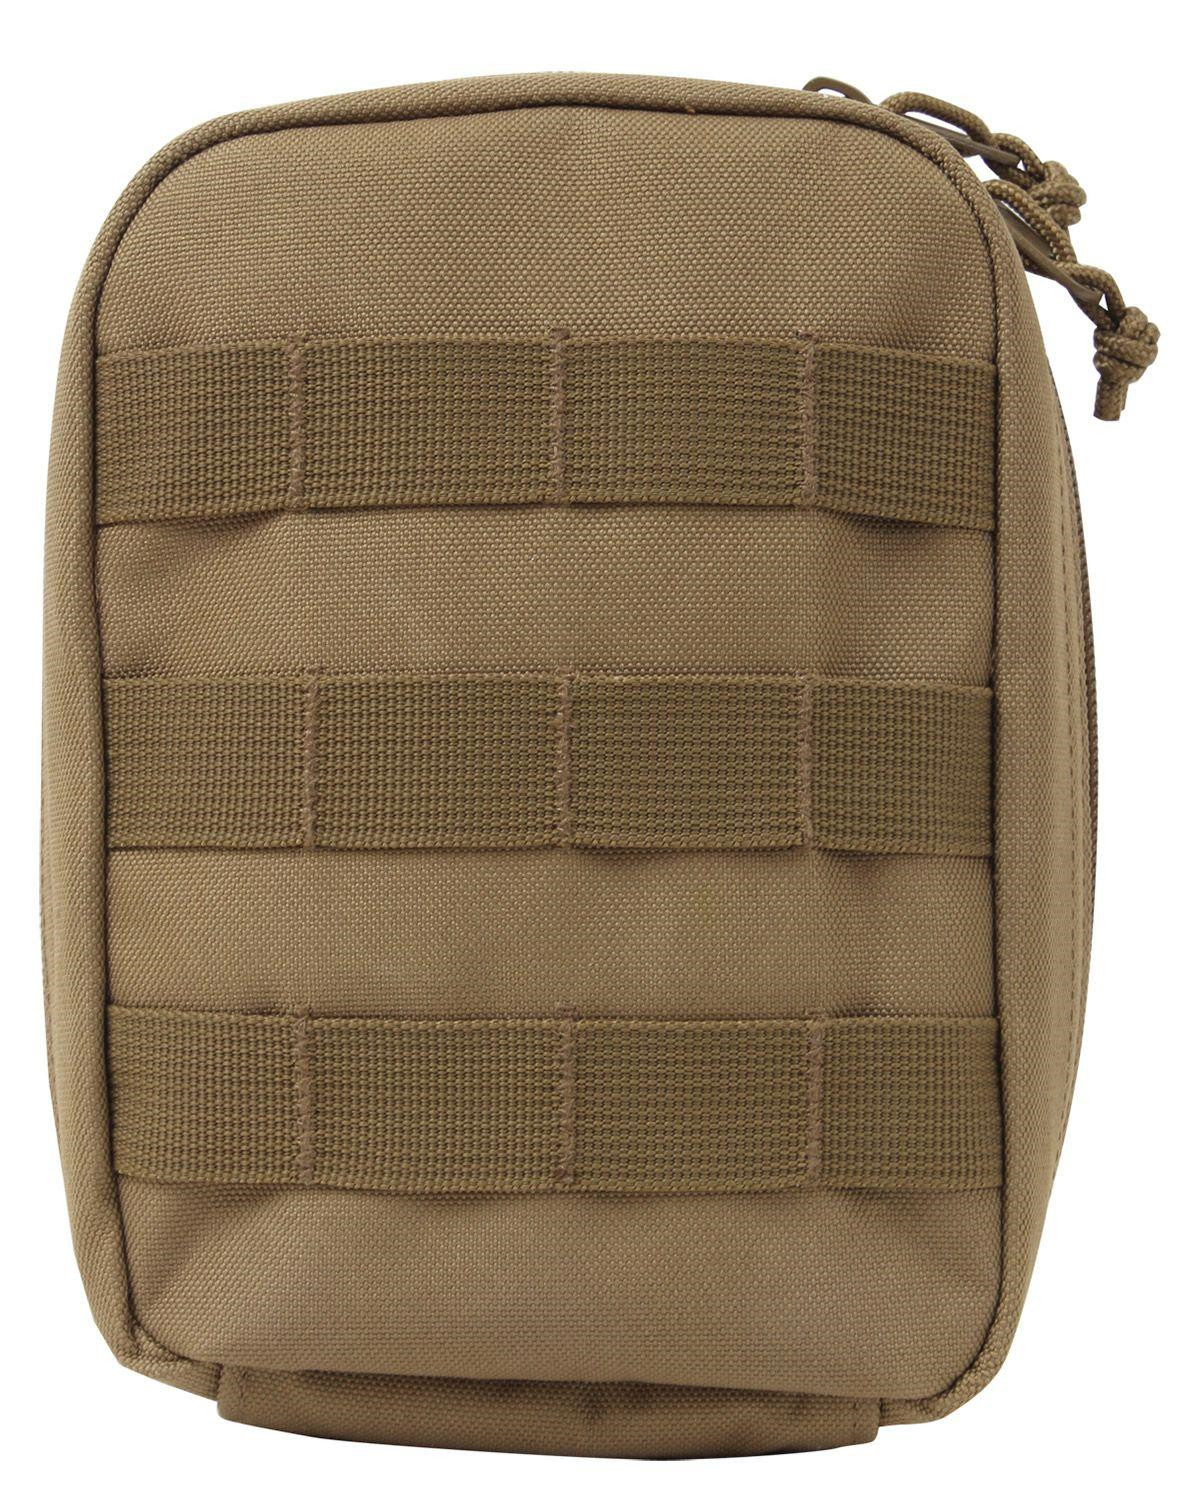 #1 - Rothco MOLLE Førstehjælpskit Pouch (Coyote Brun, One Size)